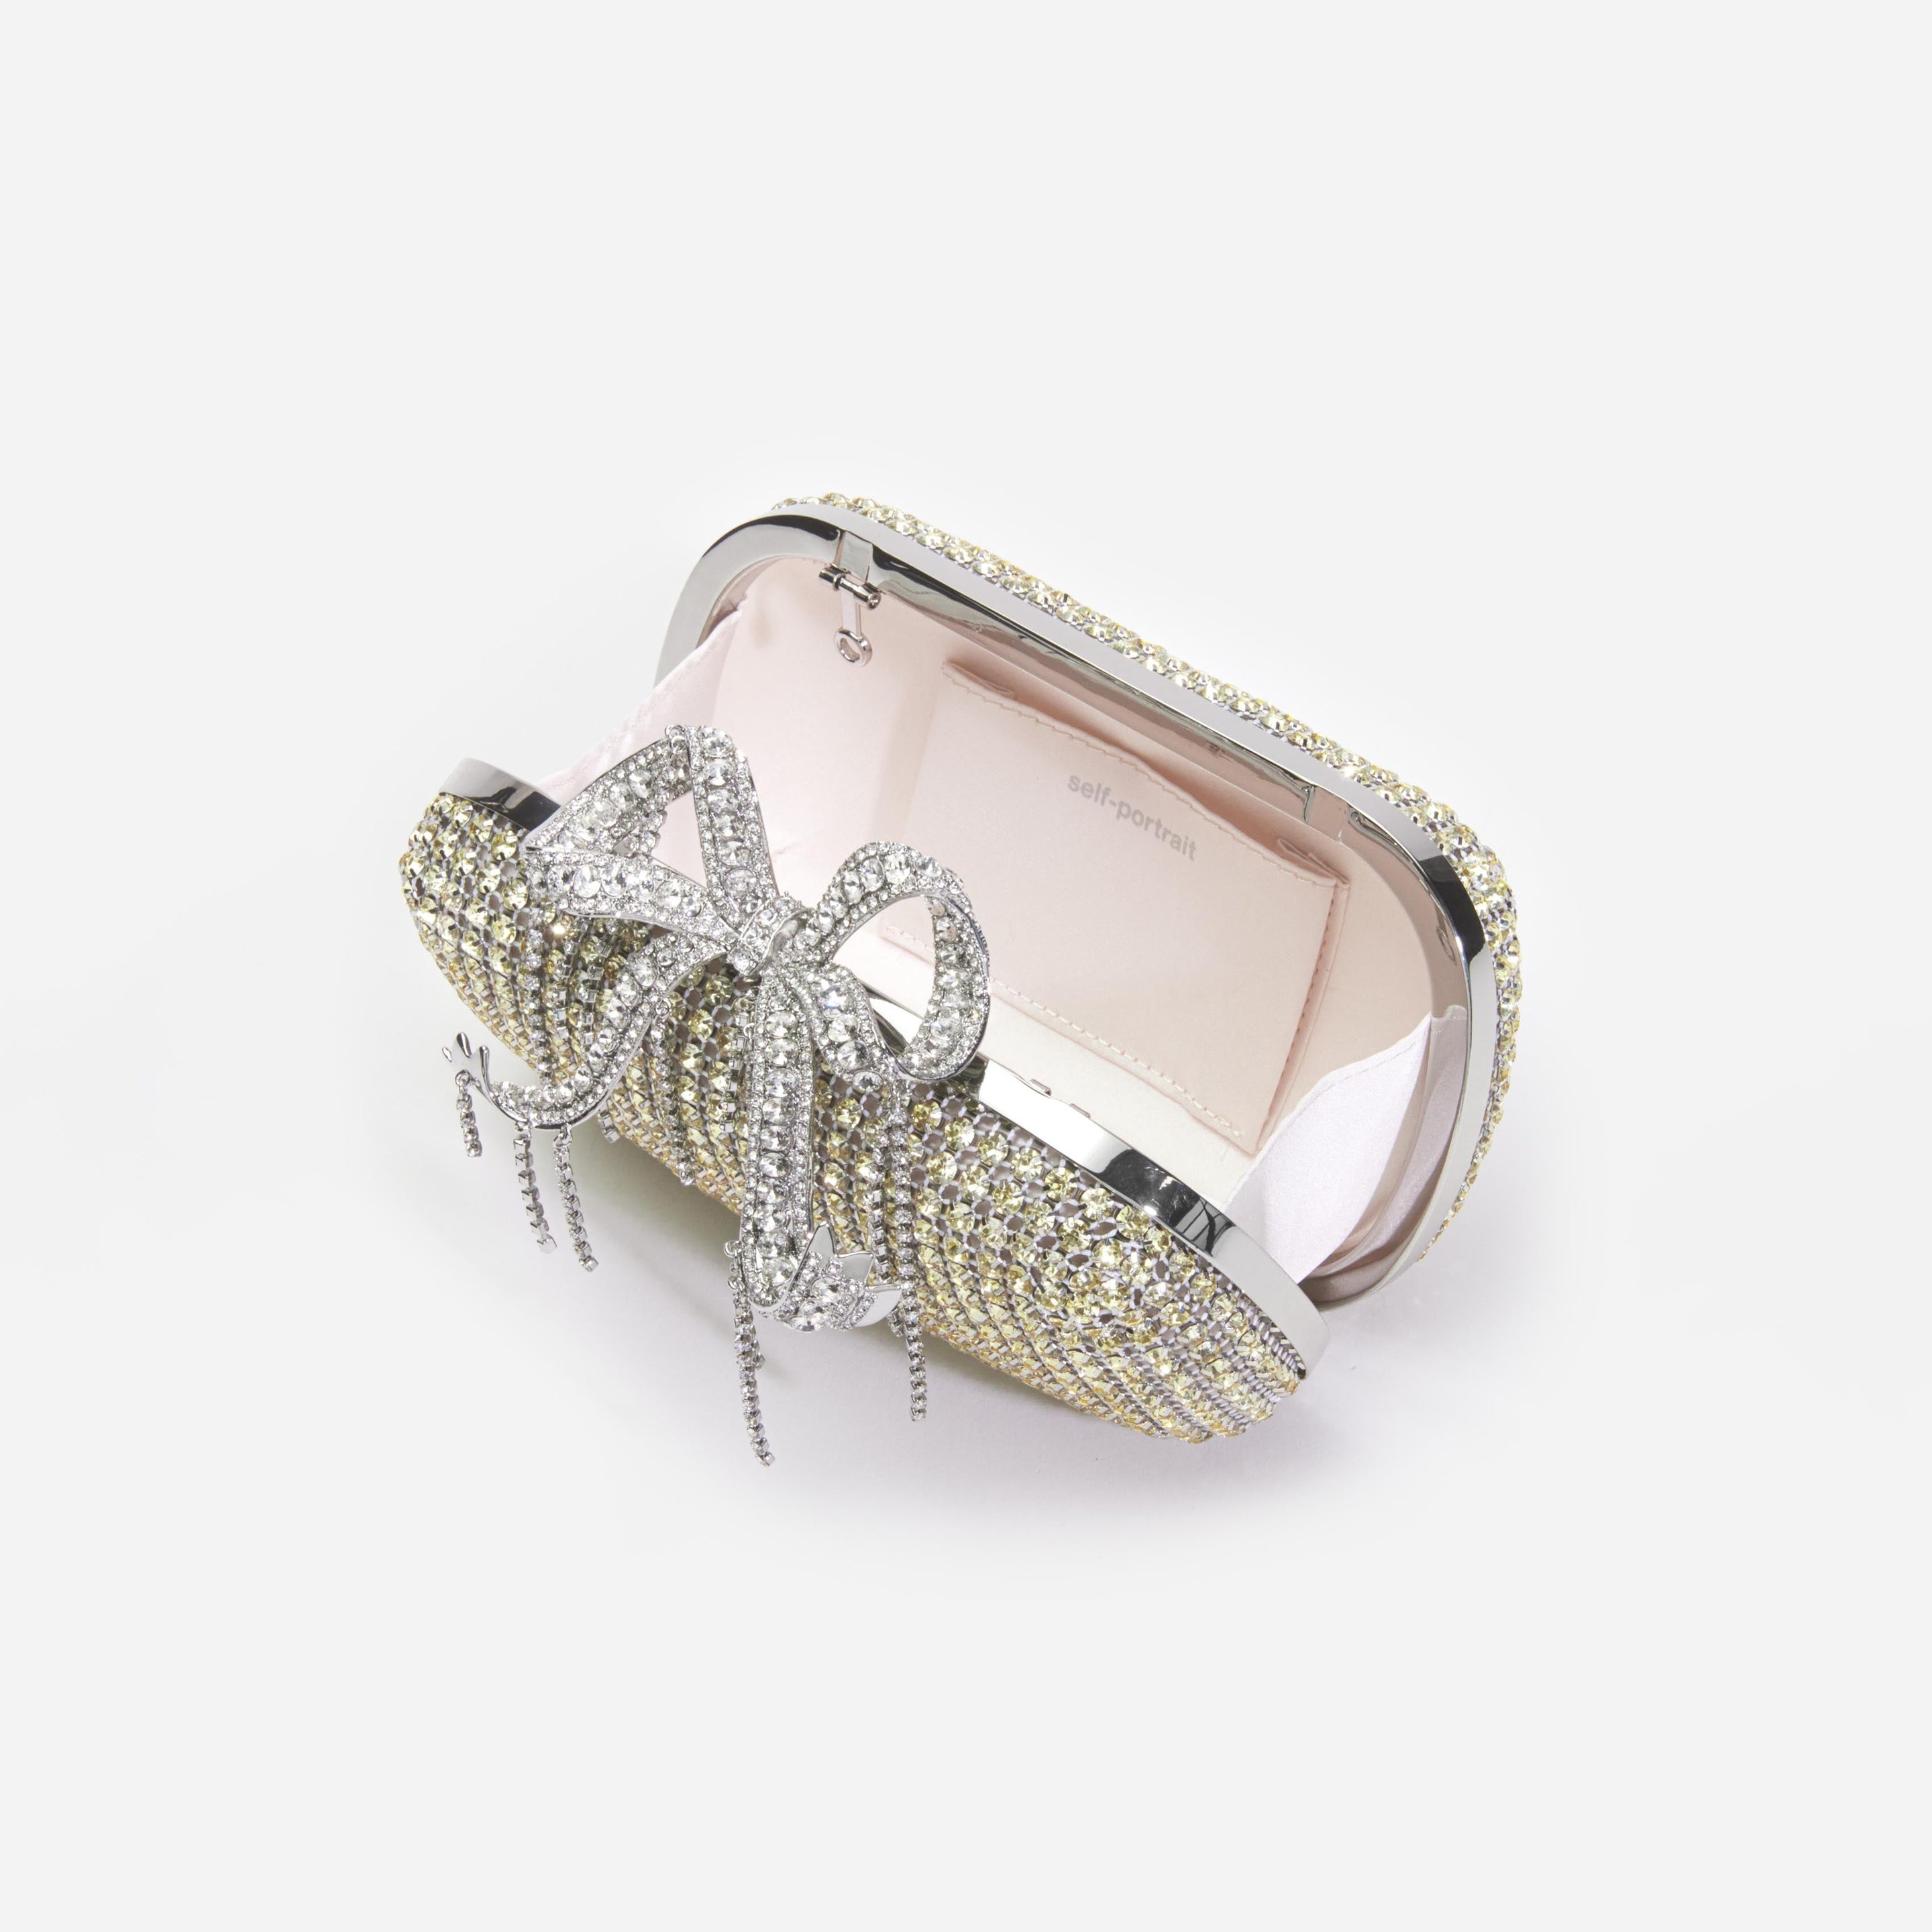 Champagne Chainmail Clutch Bag - 5